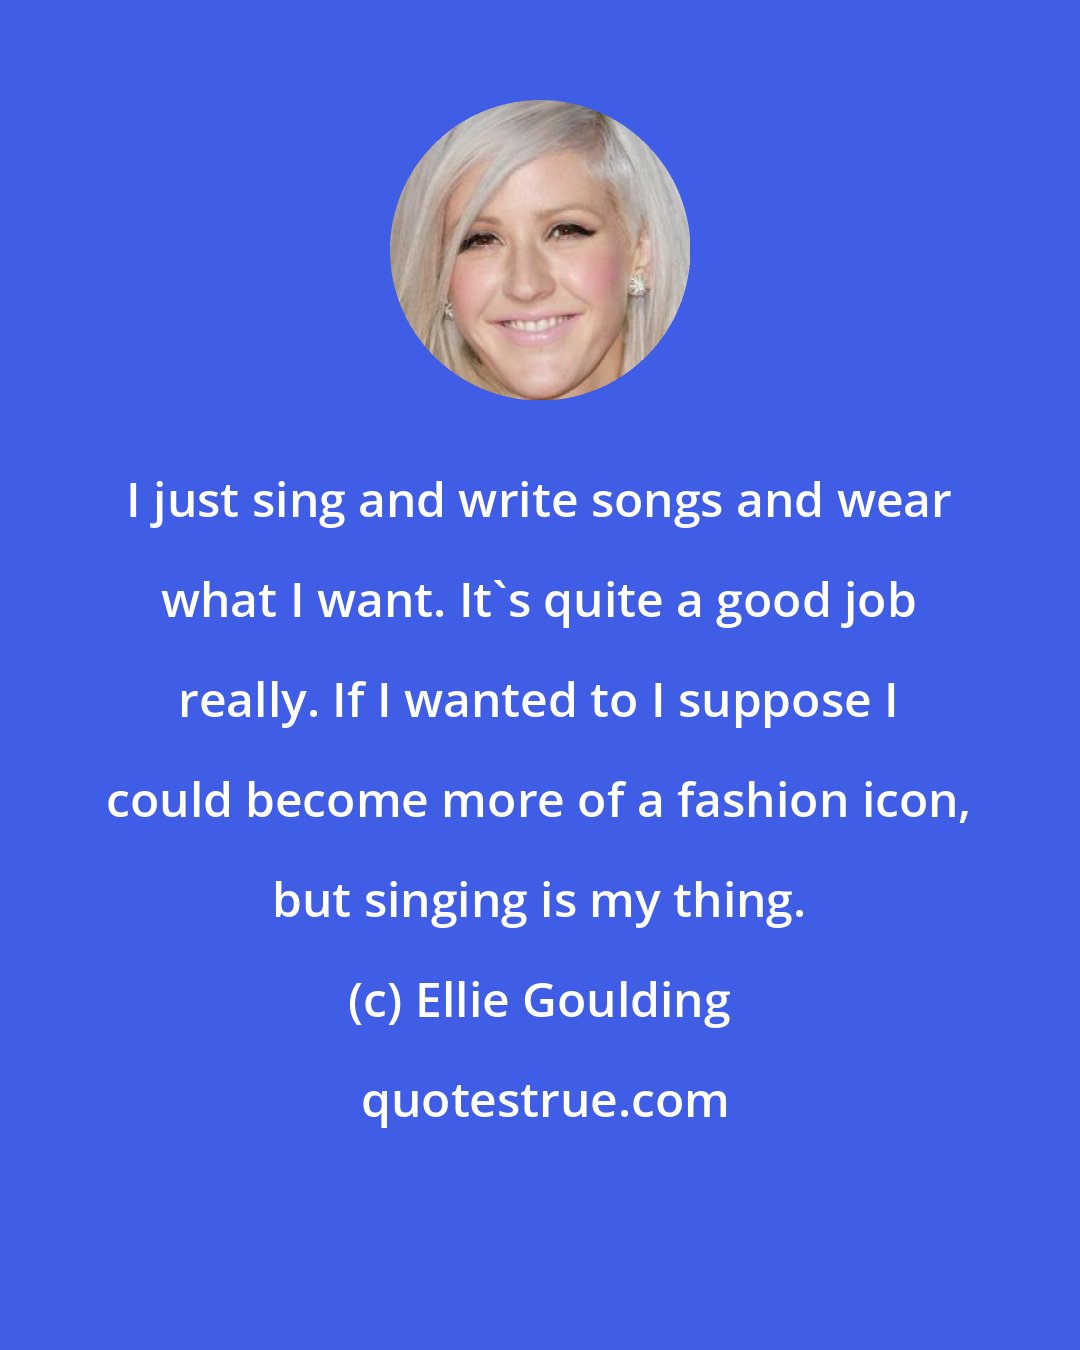 Ellie Goulding: I just sing and write songs and wear what I want. It's quite a good job really. If I wanted to I suppose I could become more of a fashion icon, but singing is my thing.